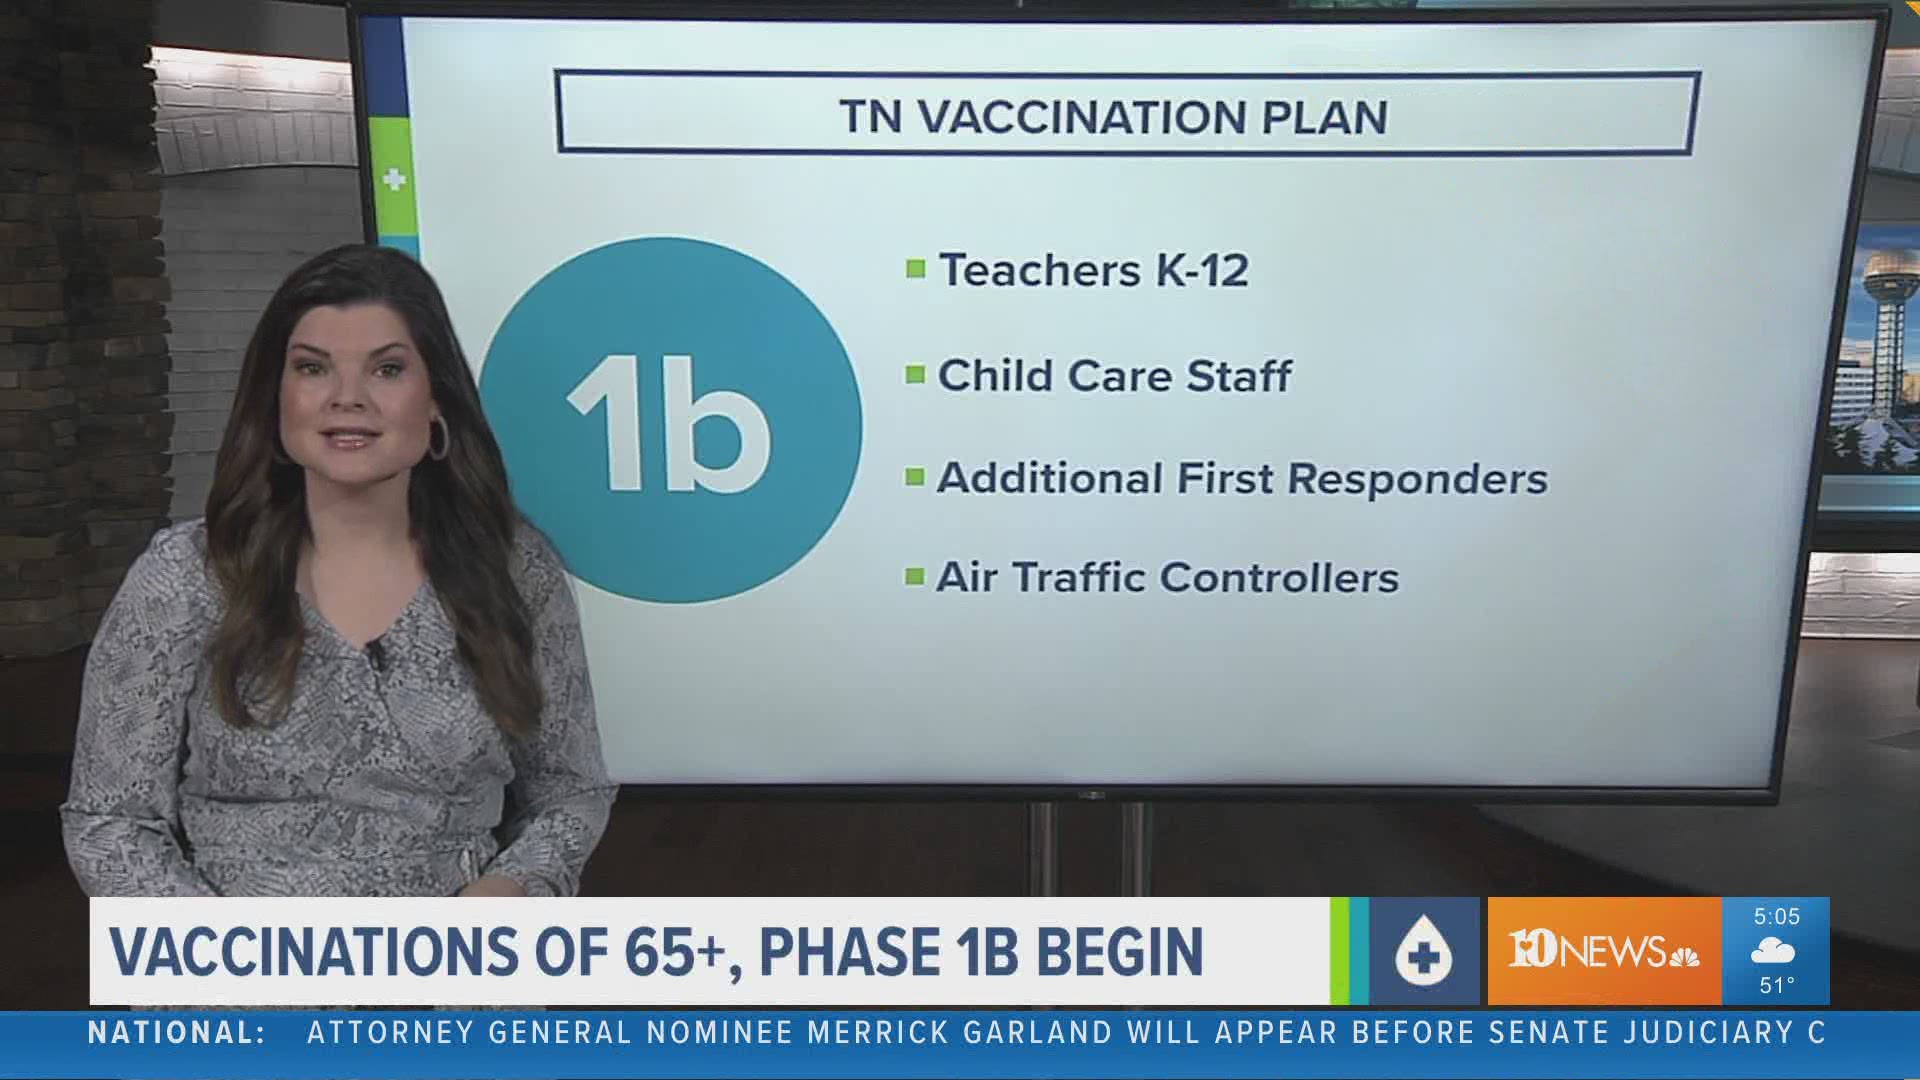 On Monday, the state and the Knox County Health Dept. will start vaccinating anyone 65 and older and people in phase 1B.